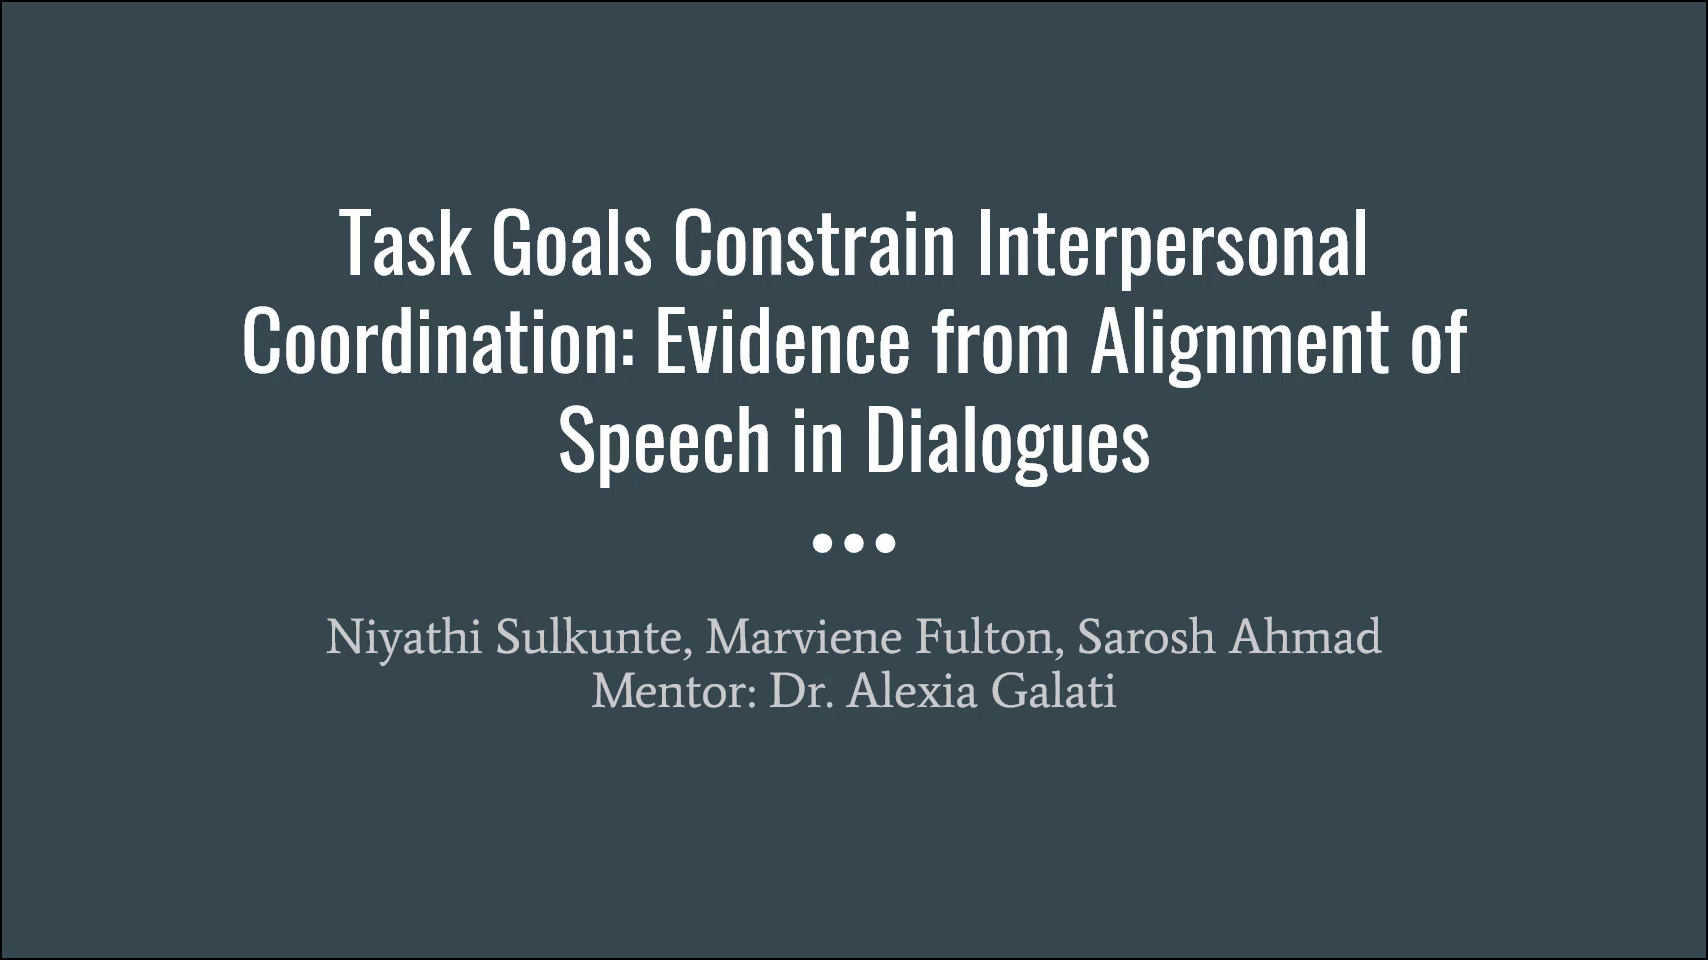 Task goals constrain interpersonal coordination : evidence from the alignment of speech in dialogues